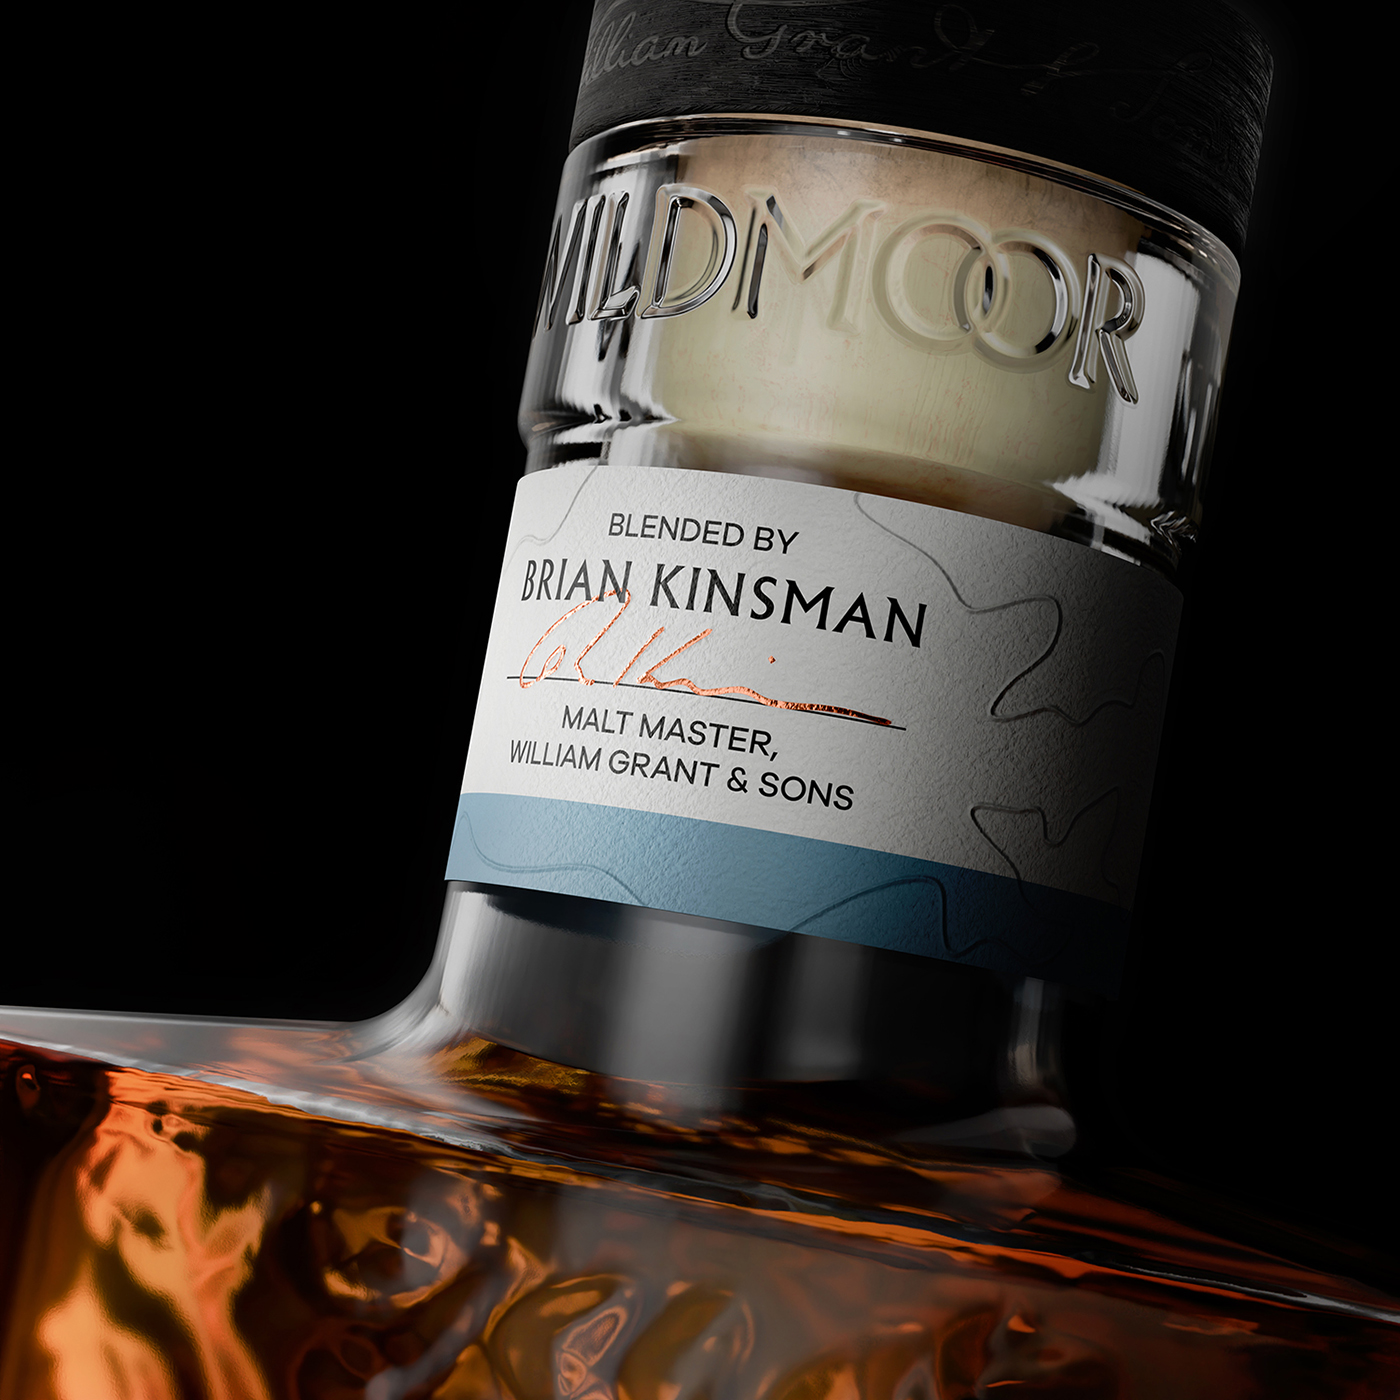 Introducing Wildmoor: A New Blended Scotch Whisky Designed by LOVE for William Grant & Sons